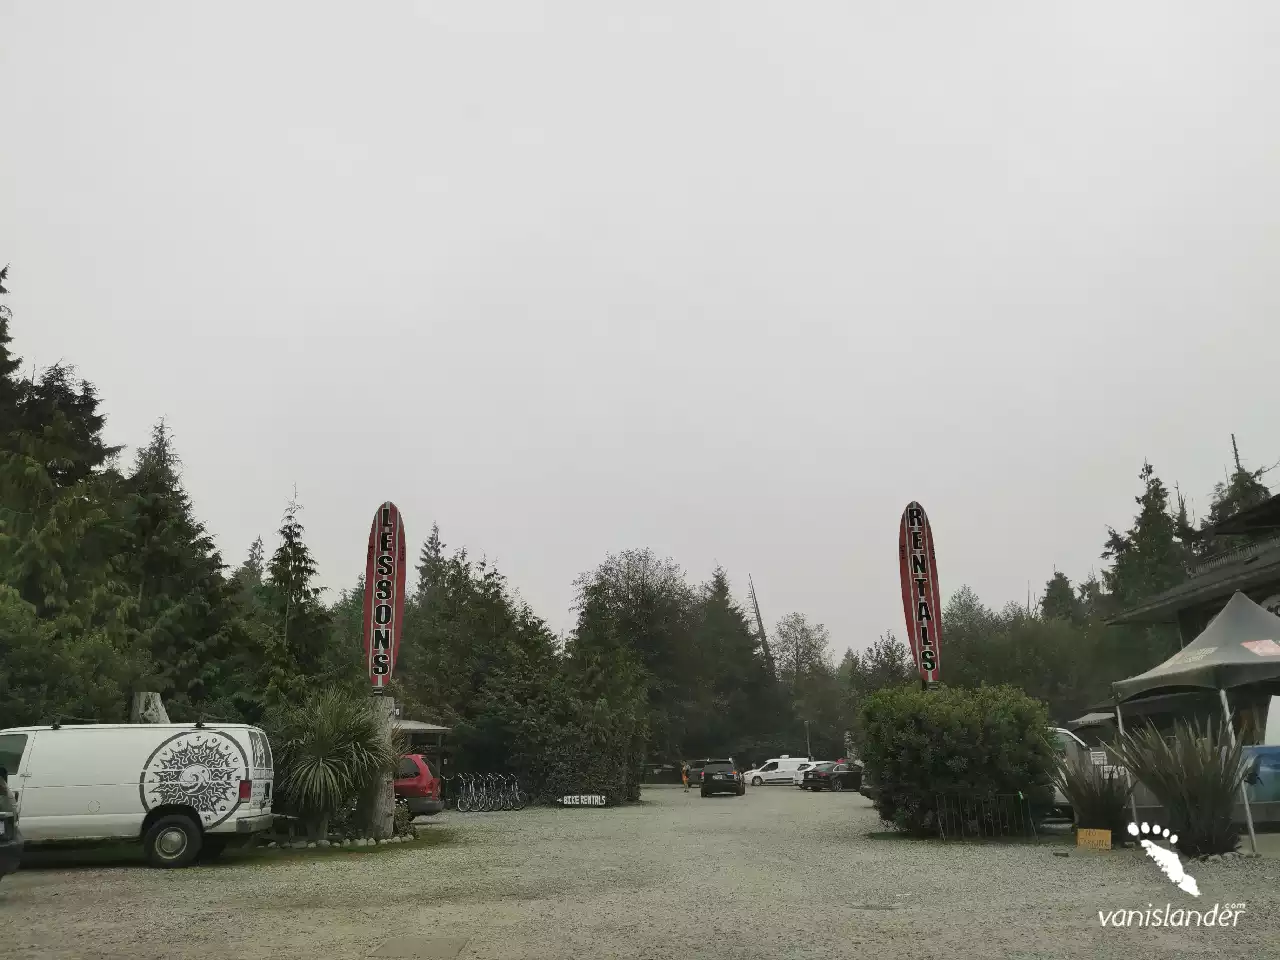 View of visitor services & parking in Tofino,  Vancouver Island